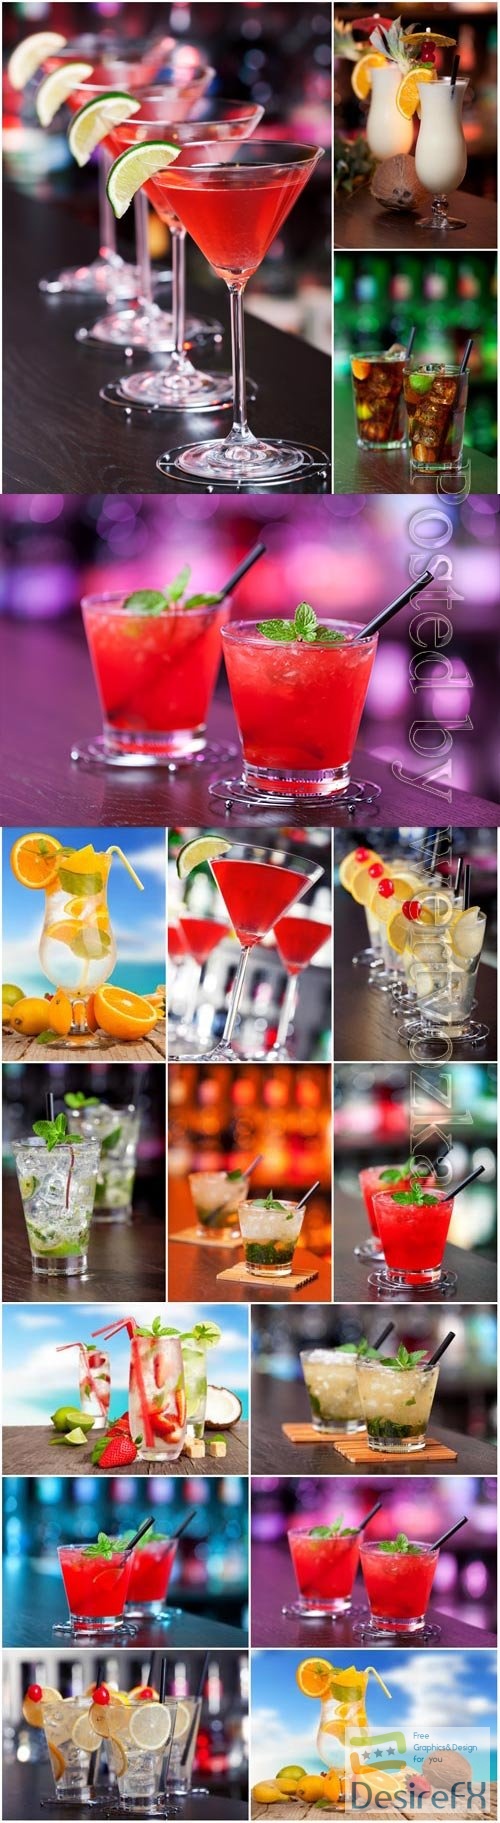 Summer cocktails stock photo